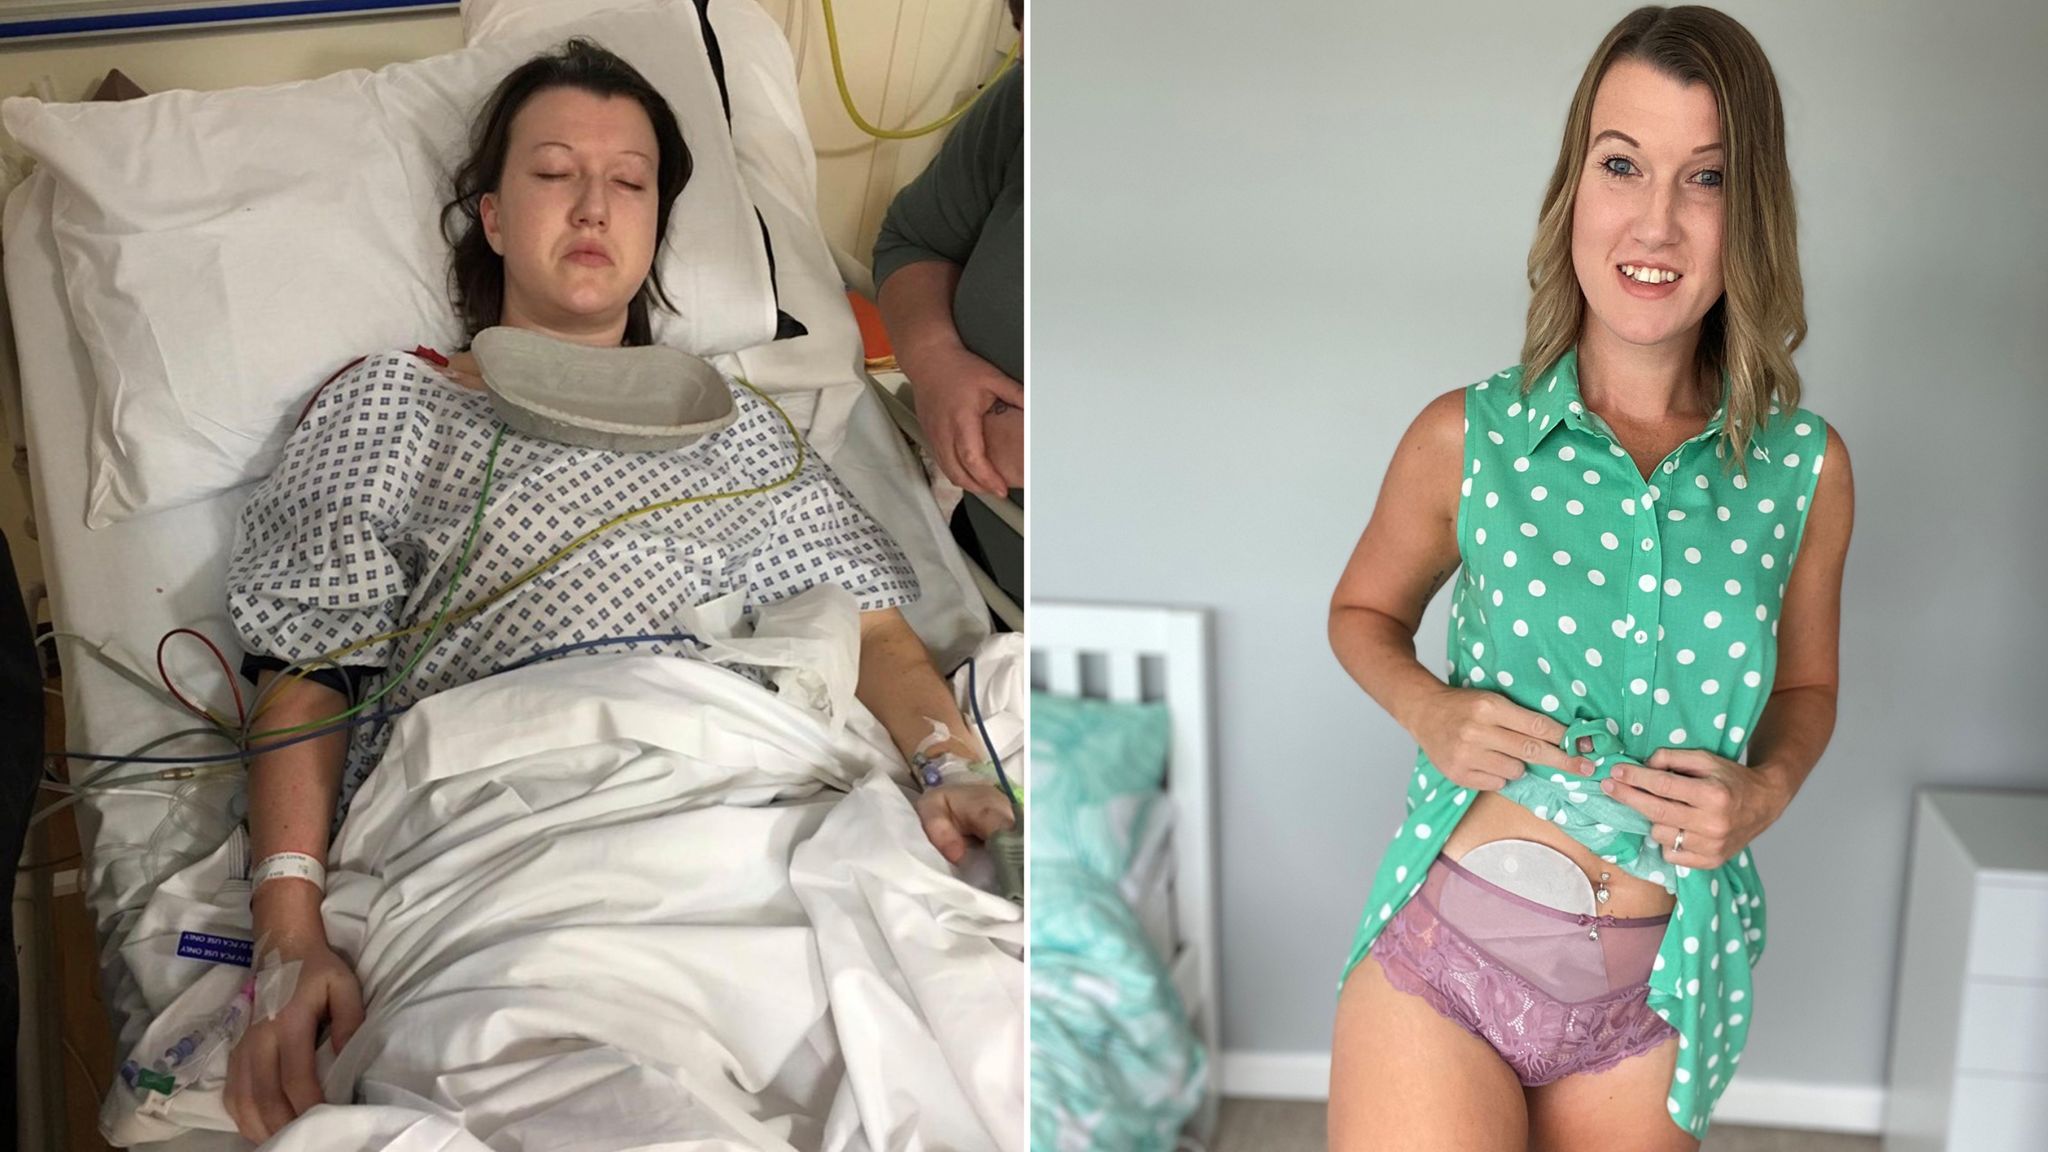 I would rather have died': How getting a stoma bag changed my life